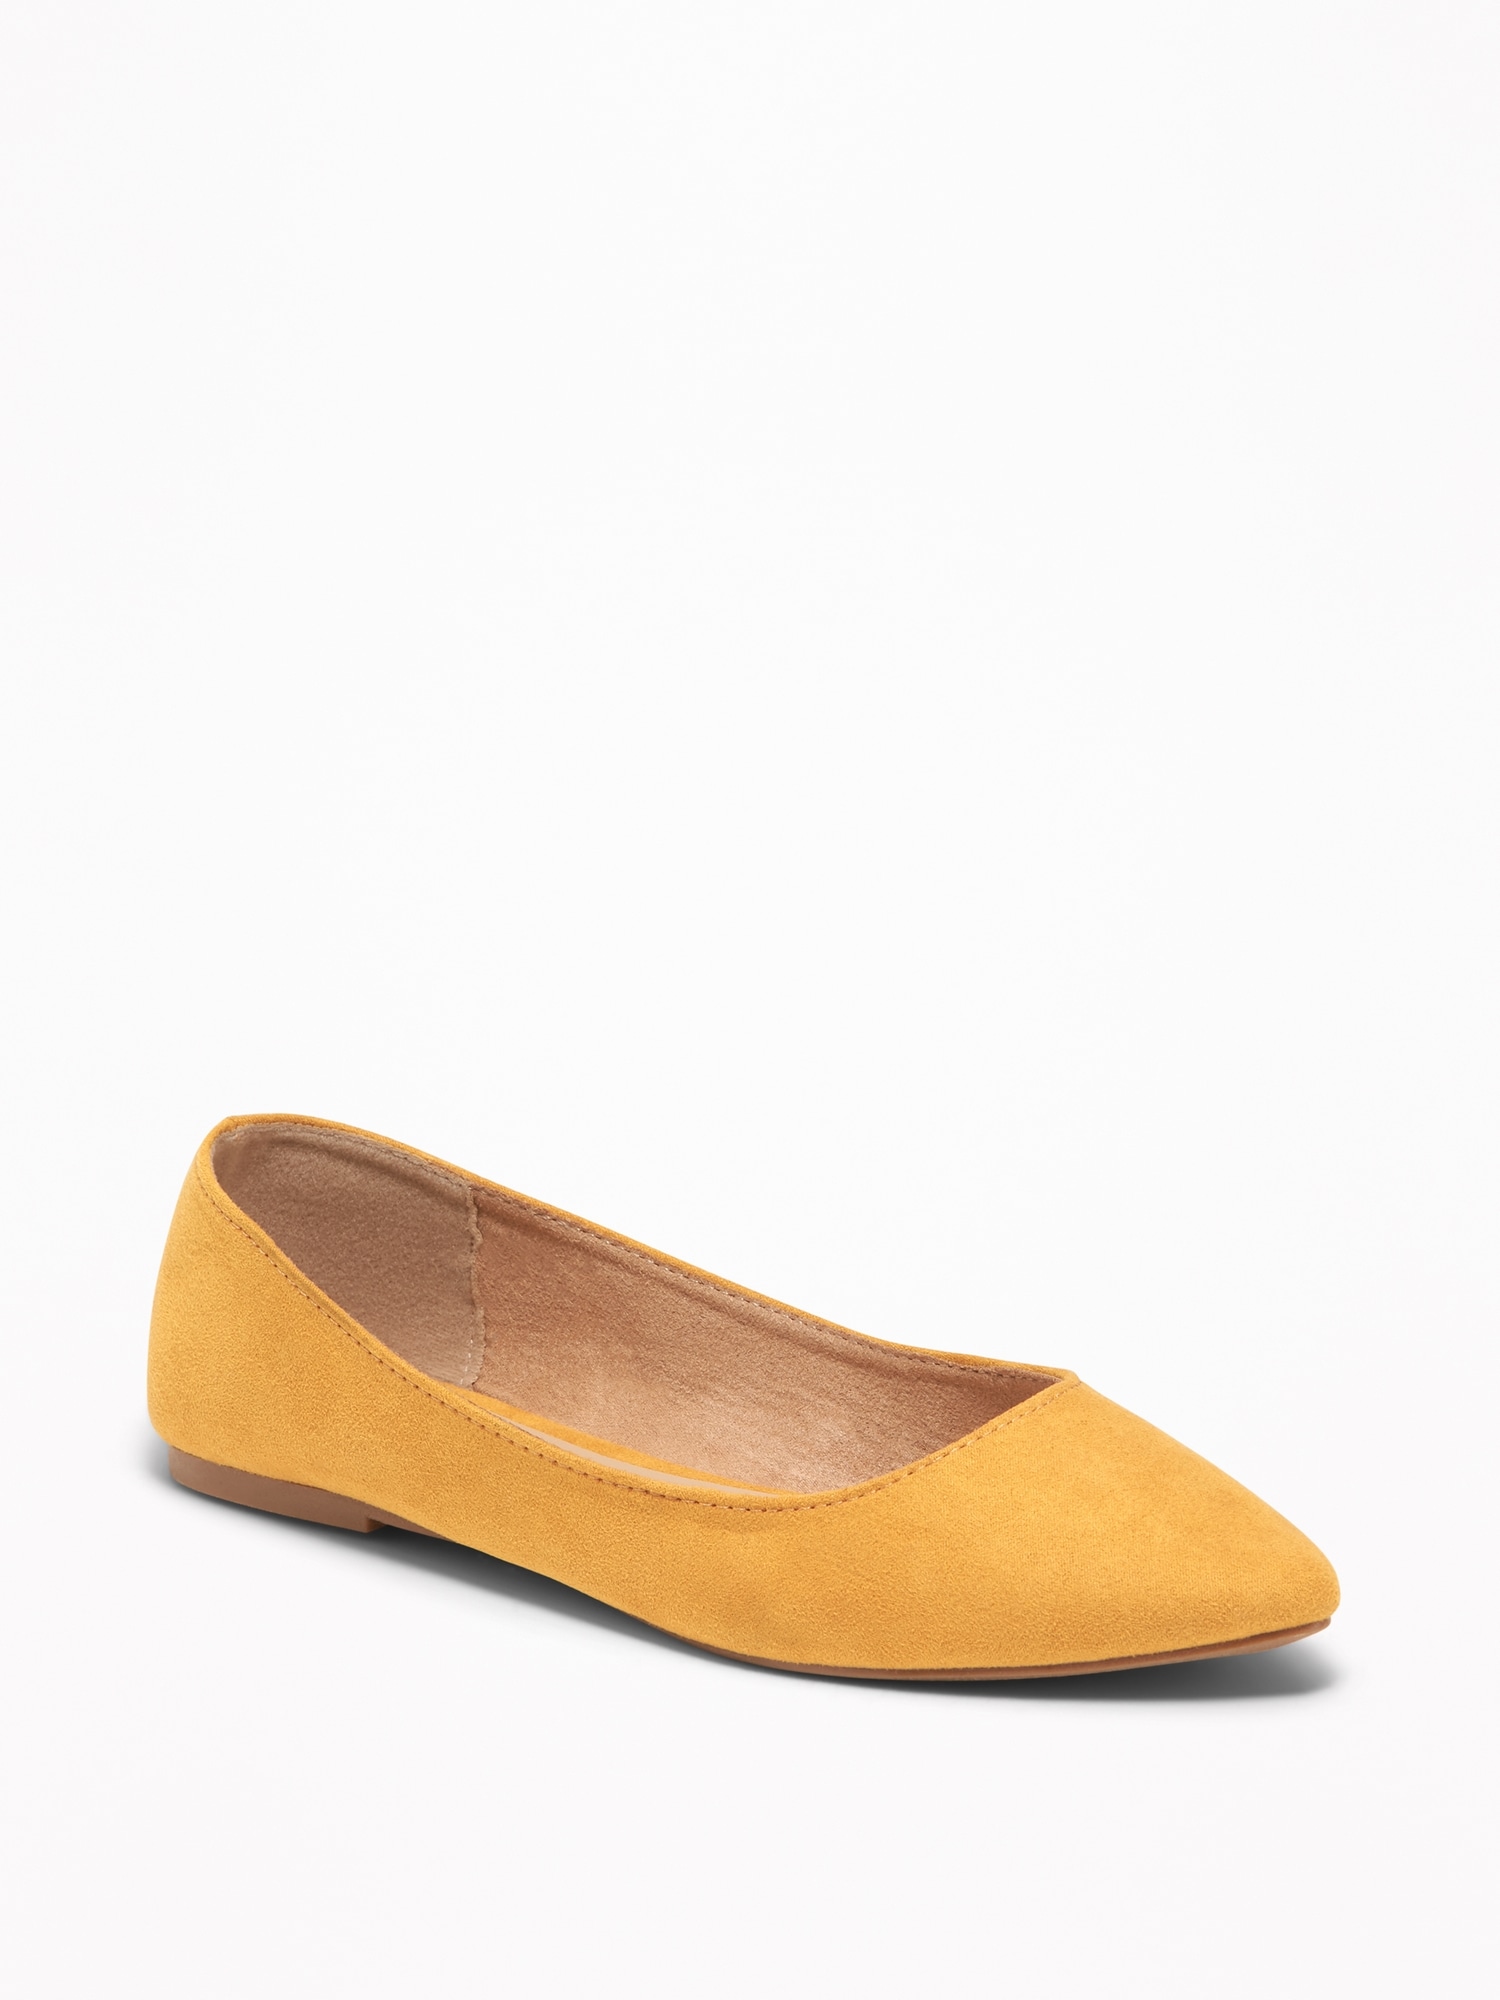 old navy yellow flats